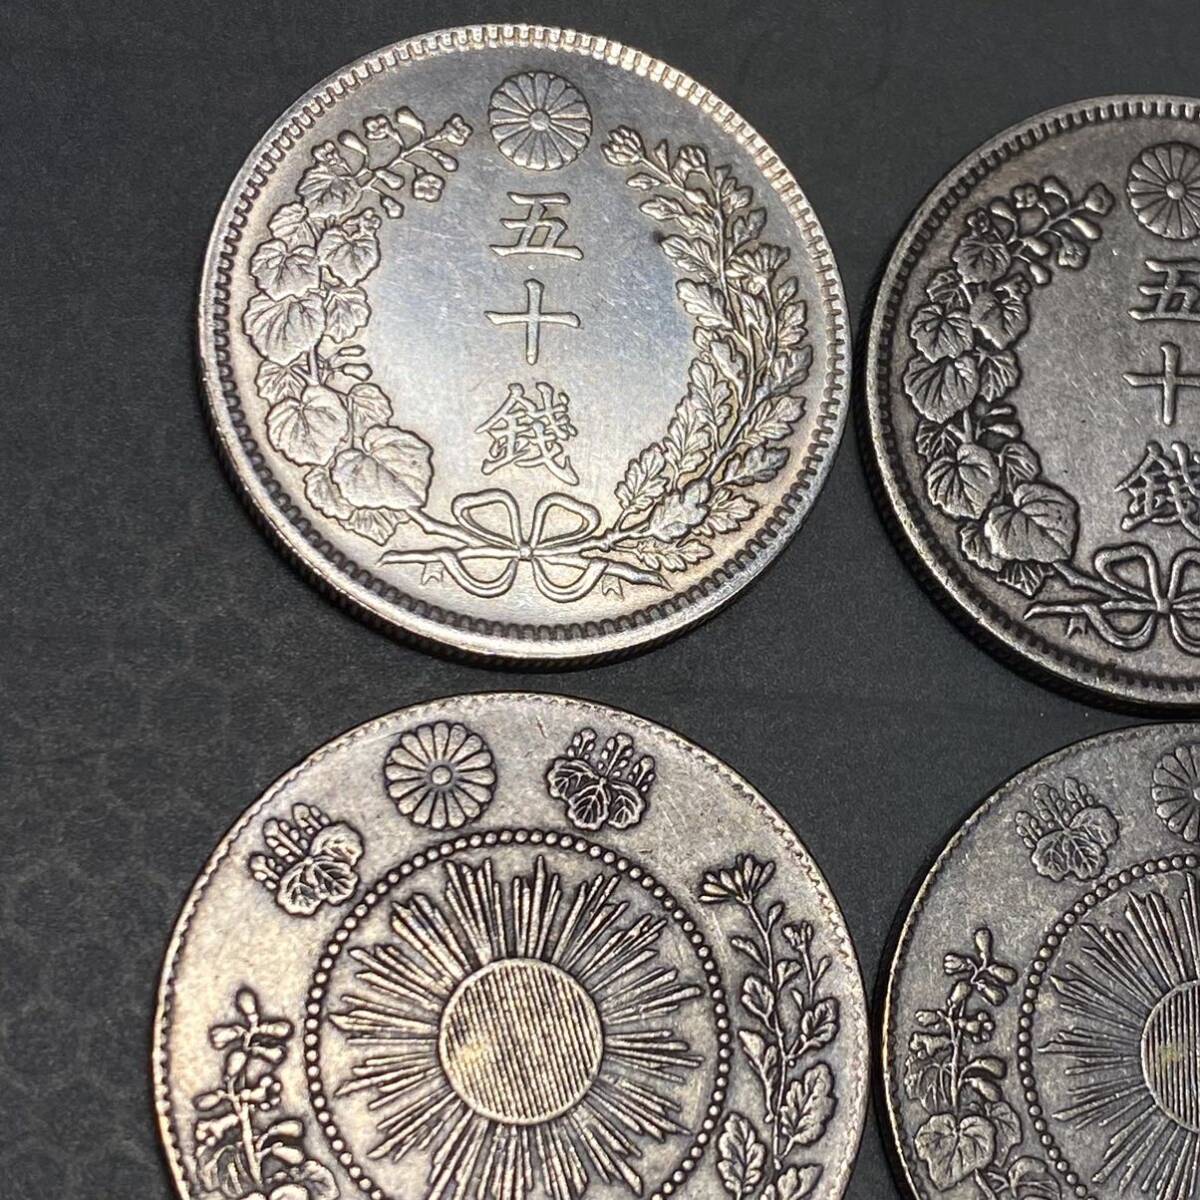  Japan old coin asahi day dragon small size 50 sen silver coin 4 sheets summarize large dragon . 10 sen silver coin total approximately 49.74g one jpy money coin antique goods coin collection 